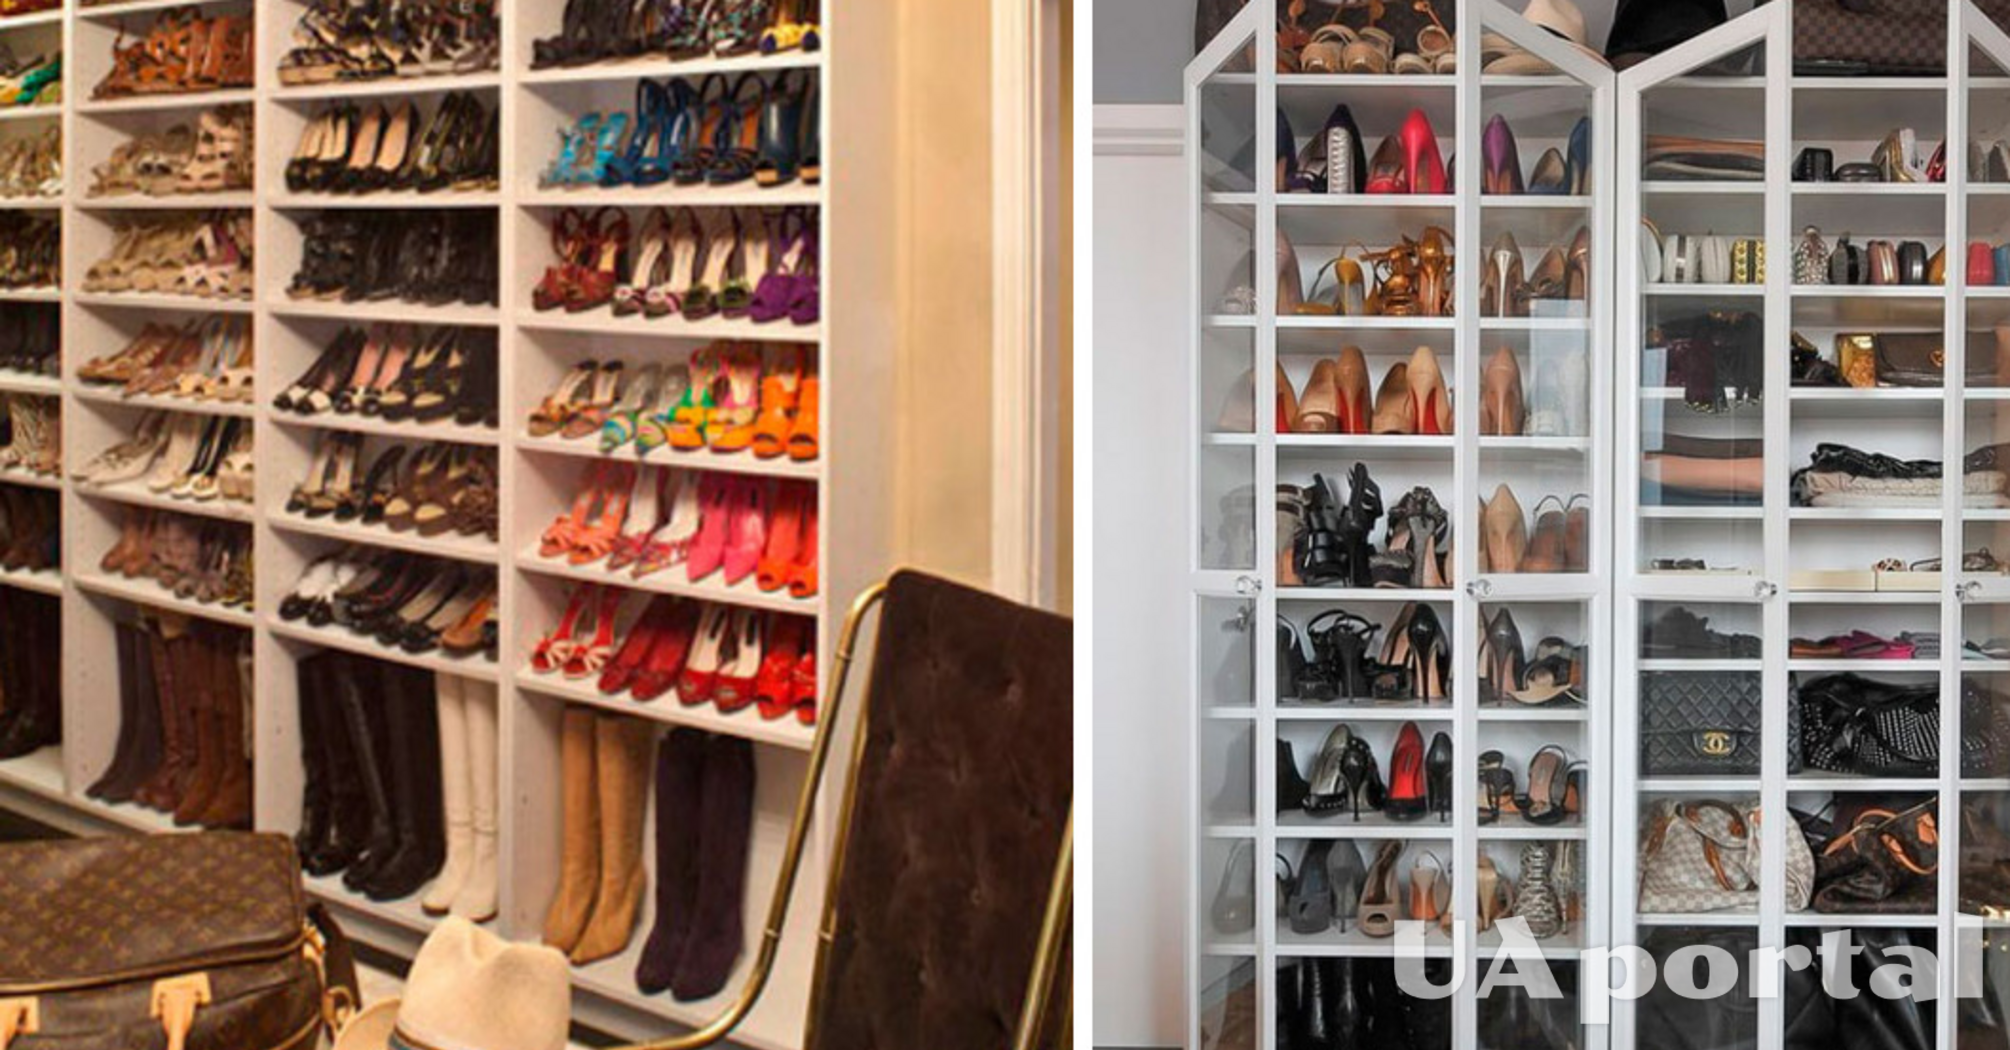 How to store your shoes if you do not have a lot of space